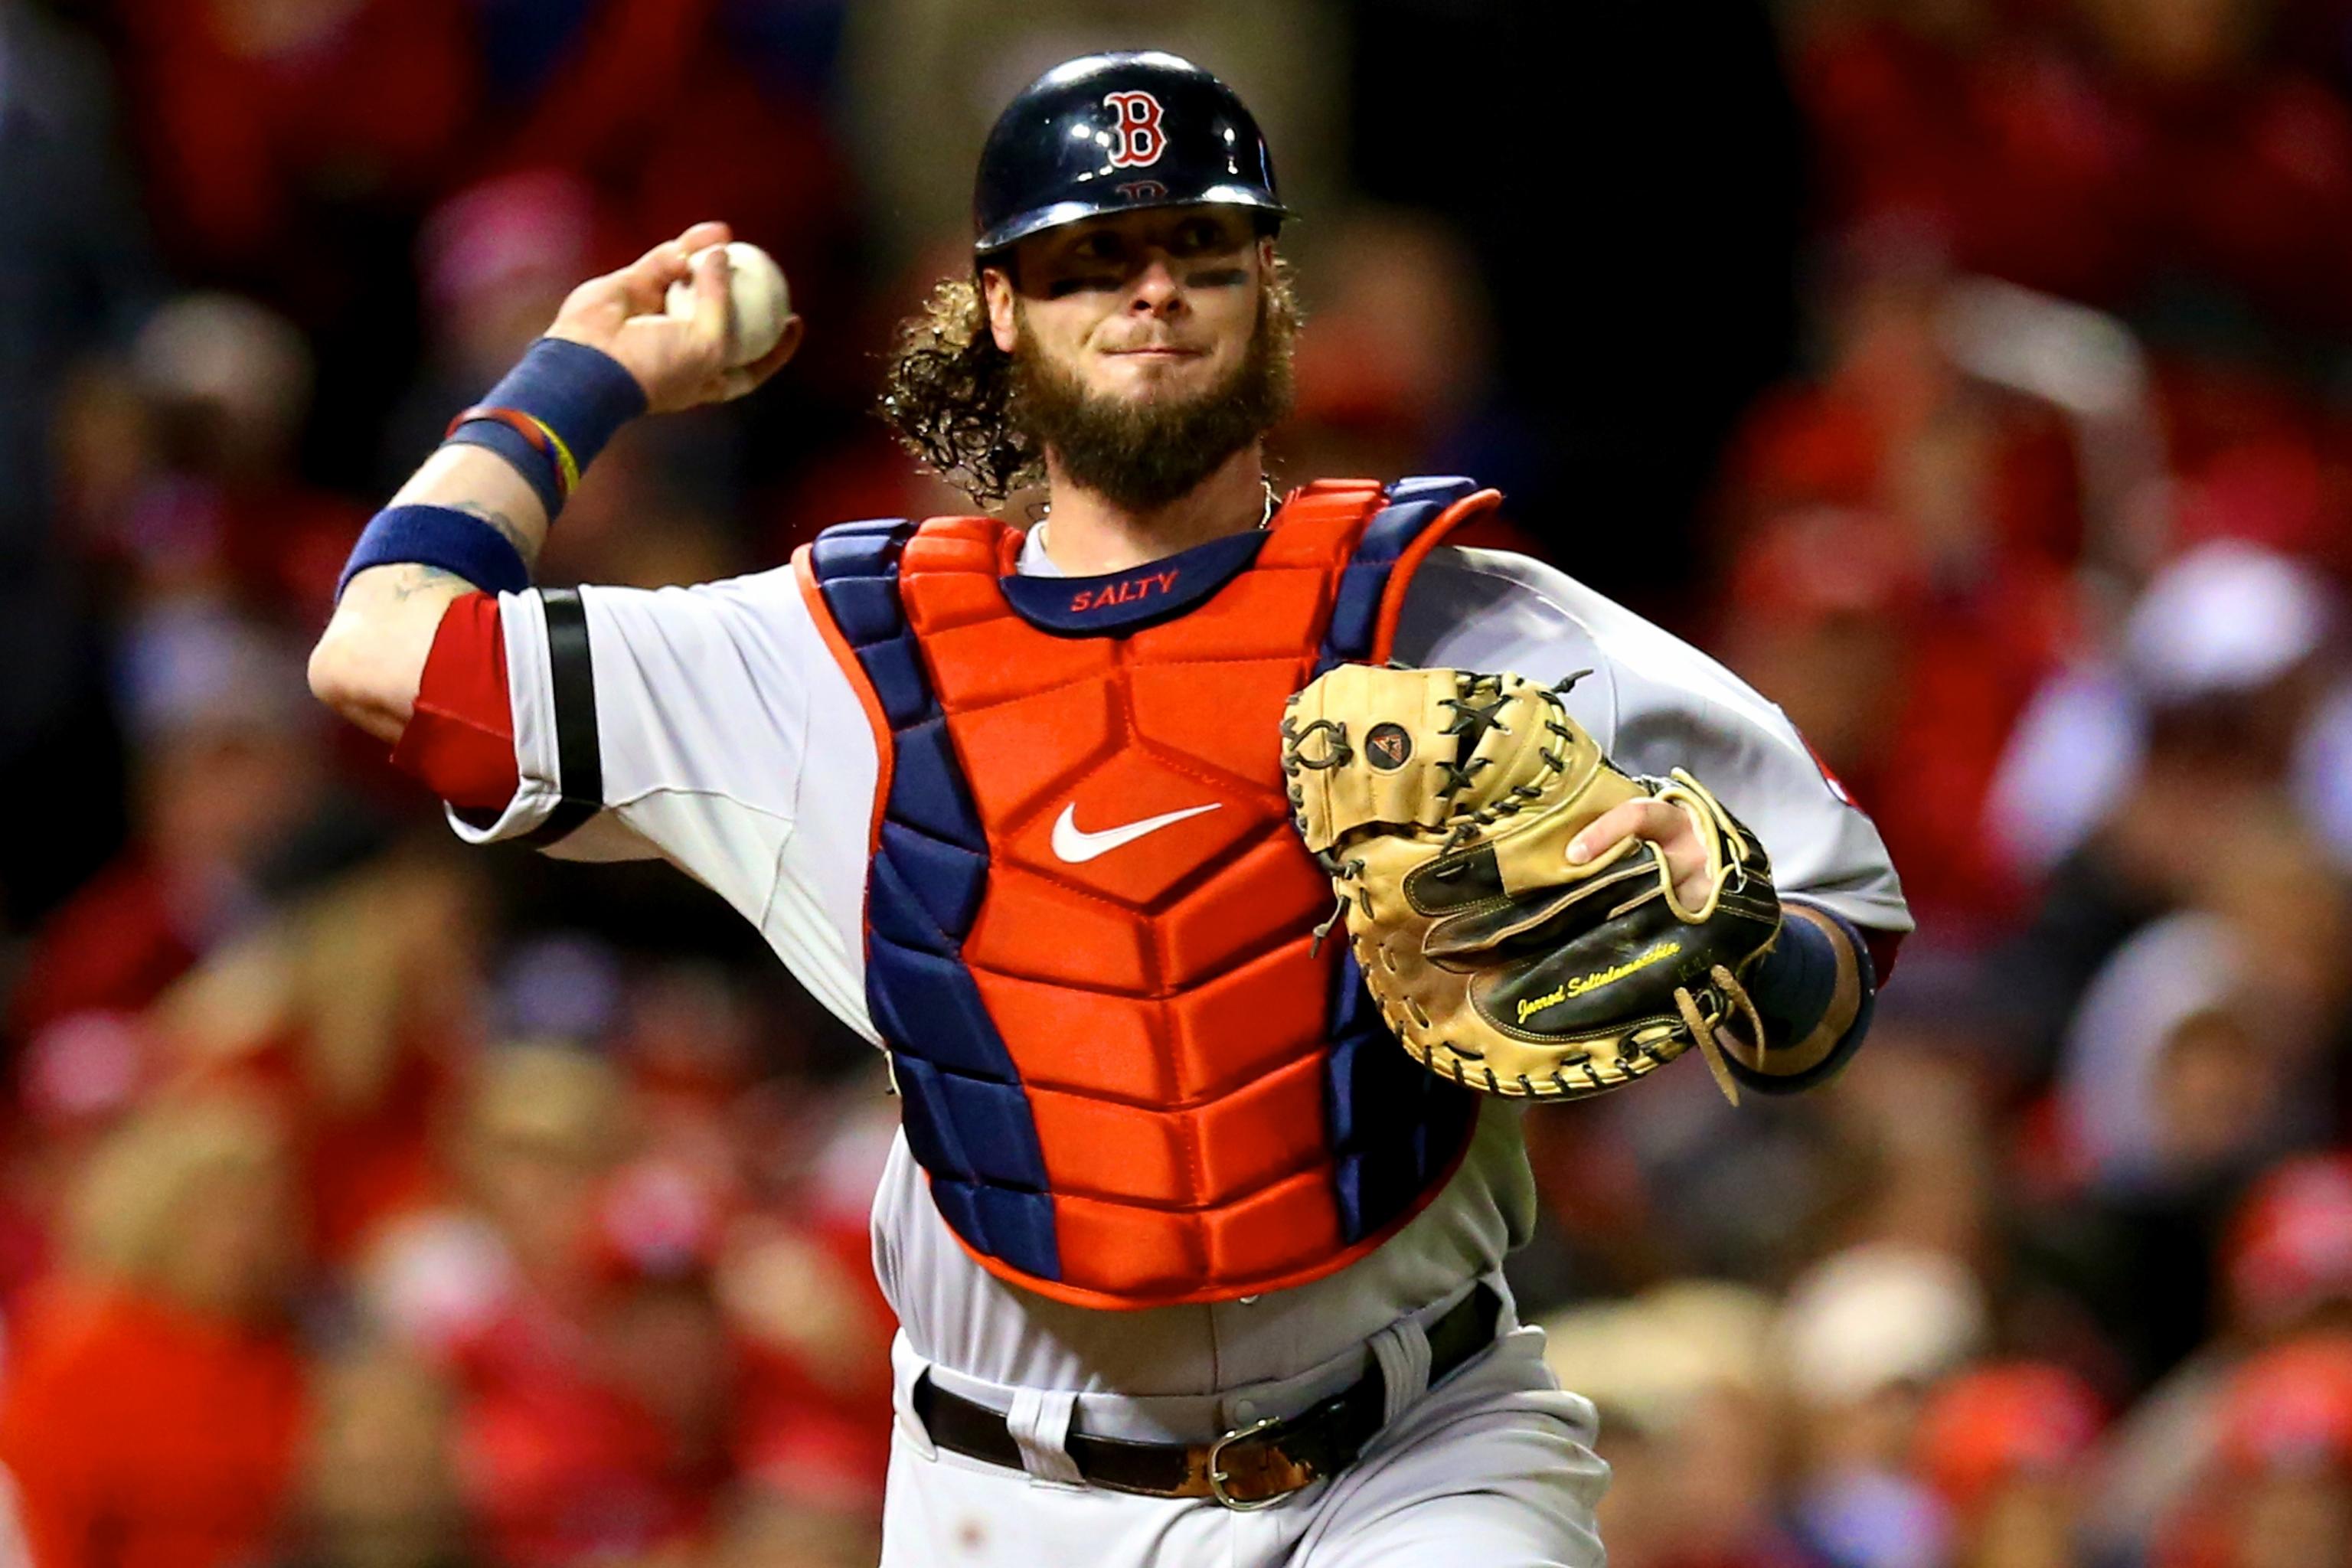 Red Sox catcher Jarrod Saltalamacchia is quietly producing - Over